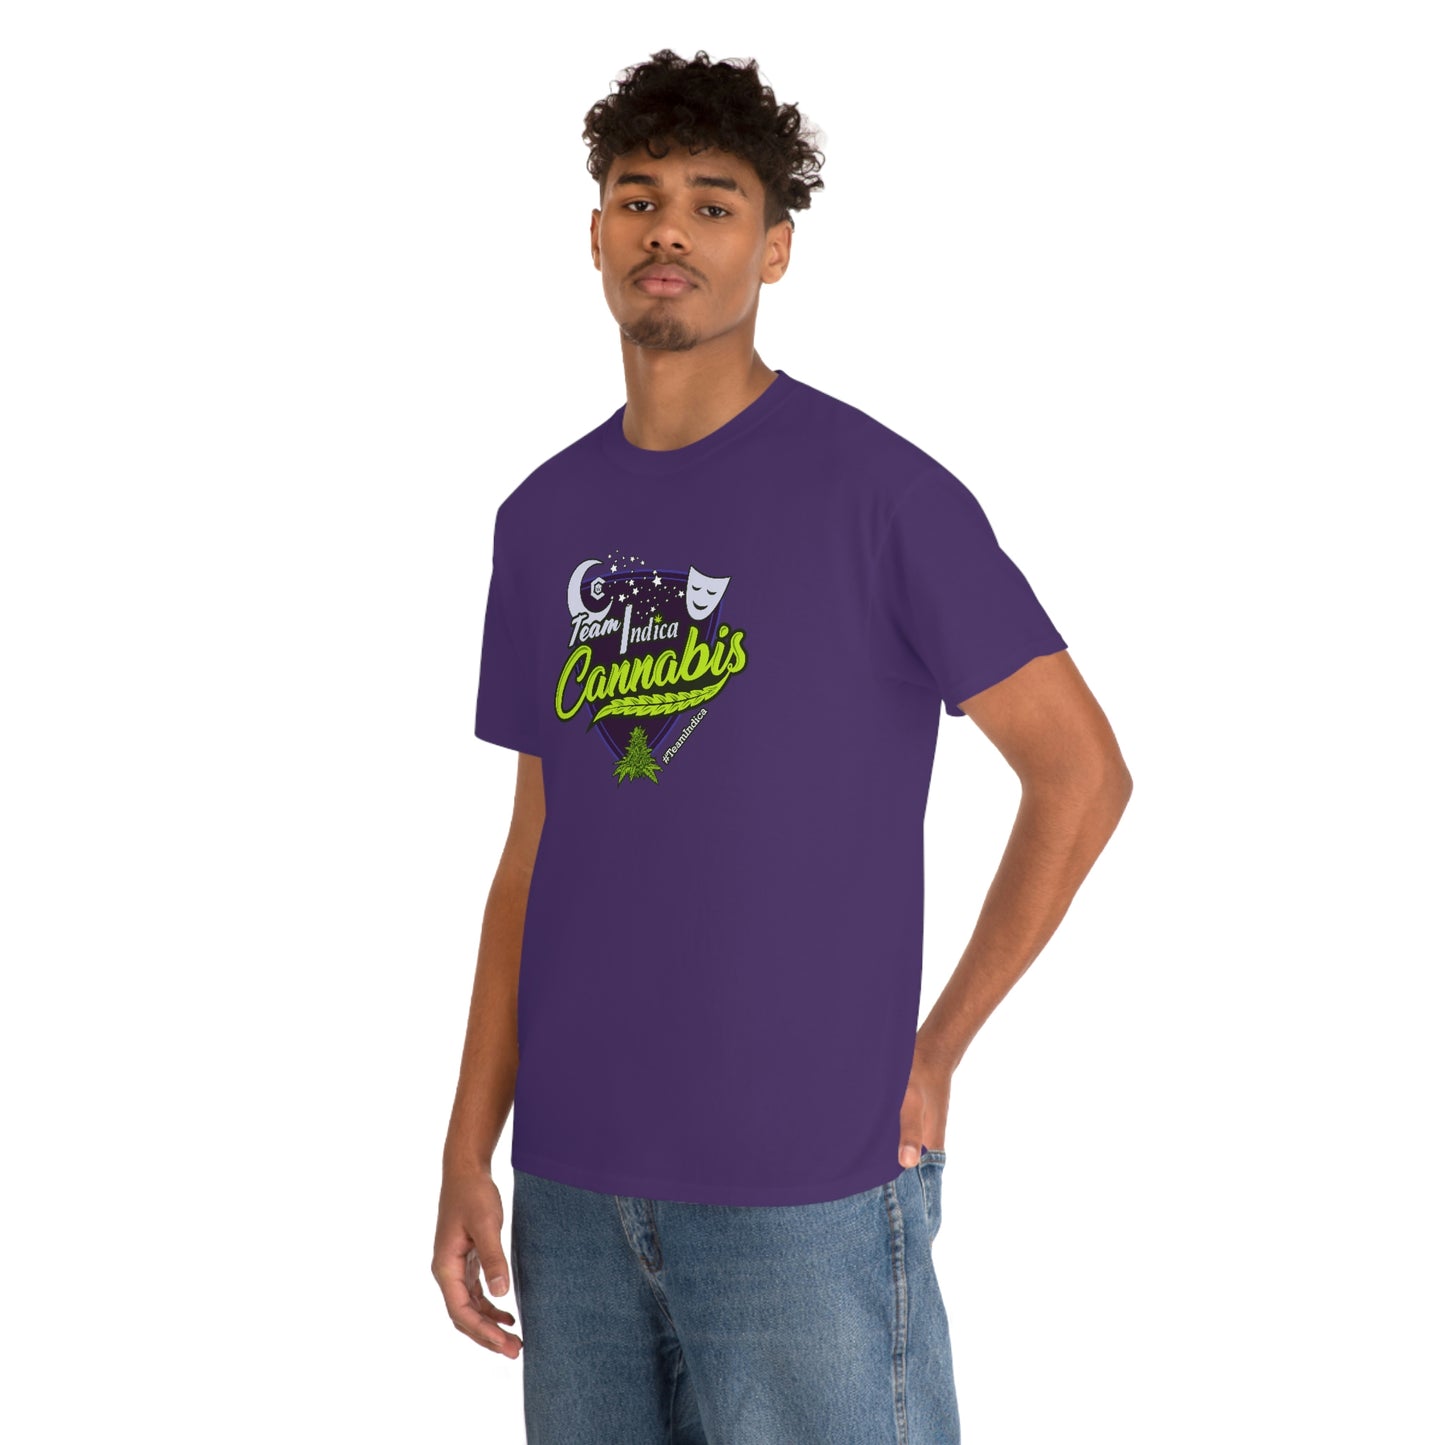 a man wearing a Team Indica Cannabis T-Shirt with a green and purple logo.